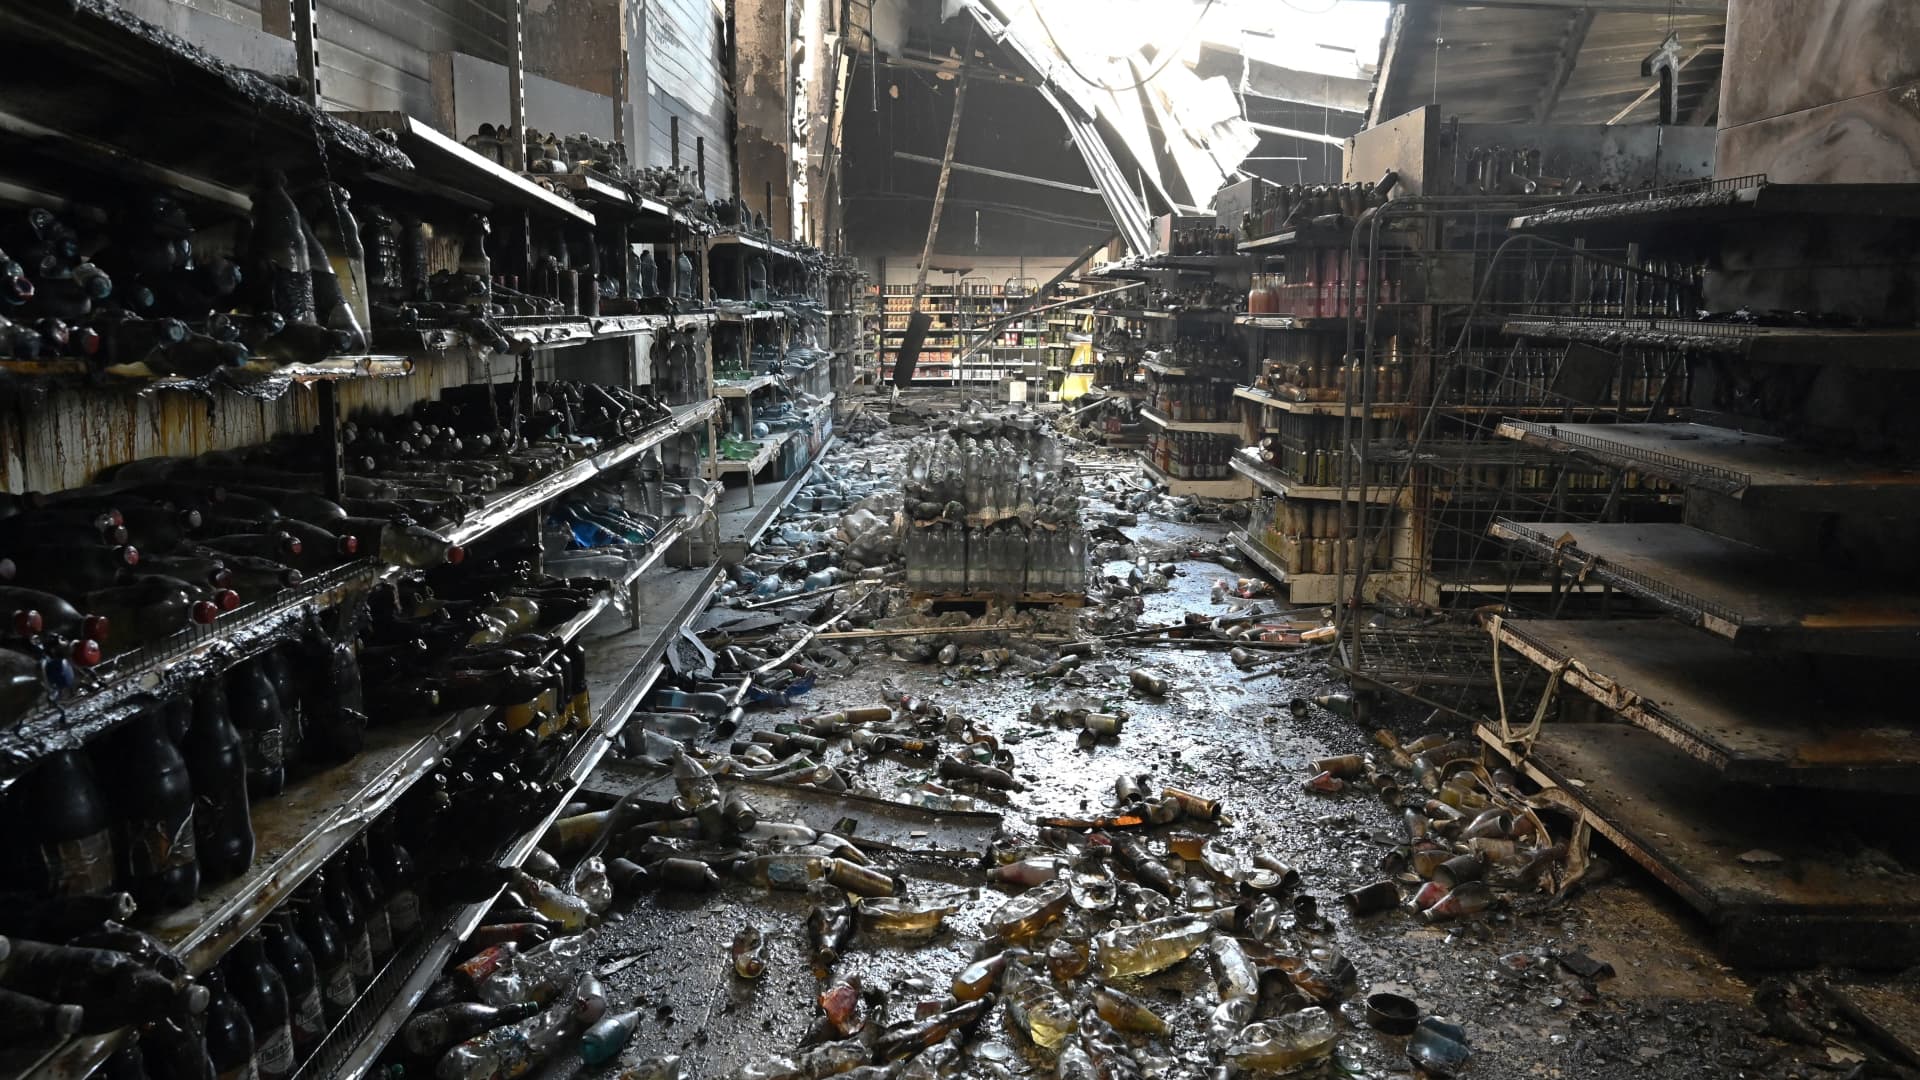 Charred goods in a grocery store of the destroyed Amstor mall in Kremenchuk, on June 28, 2022, one day after it was hit by a Russian missile strike, according to Ukrainian authorities.